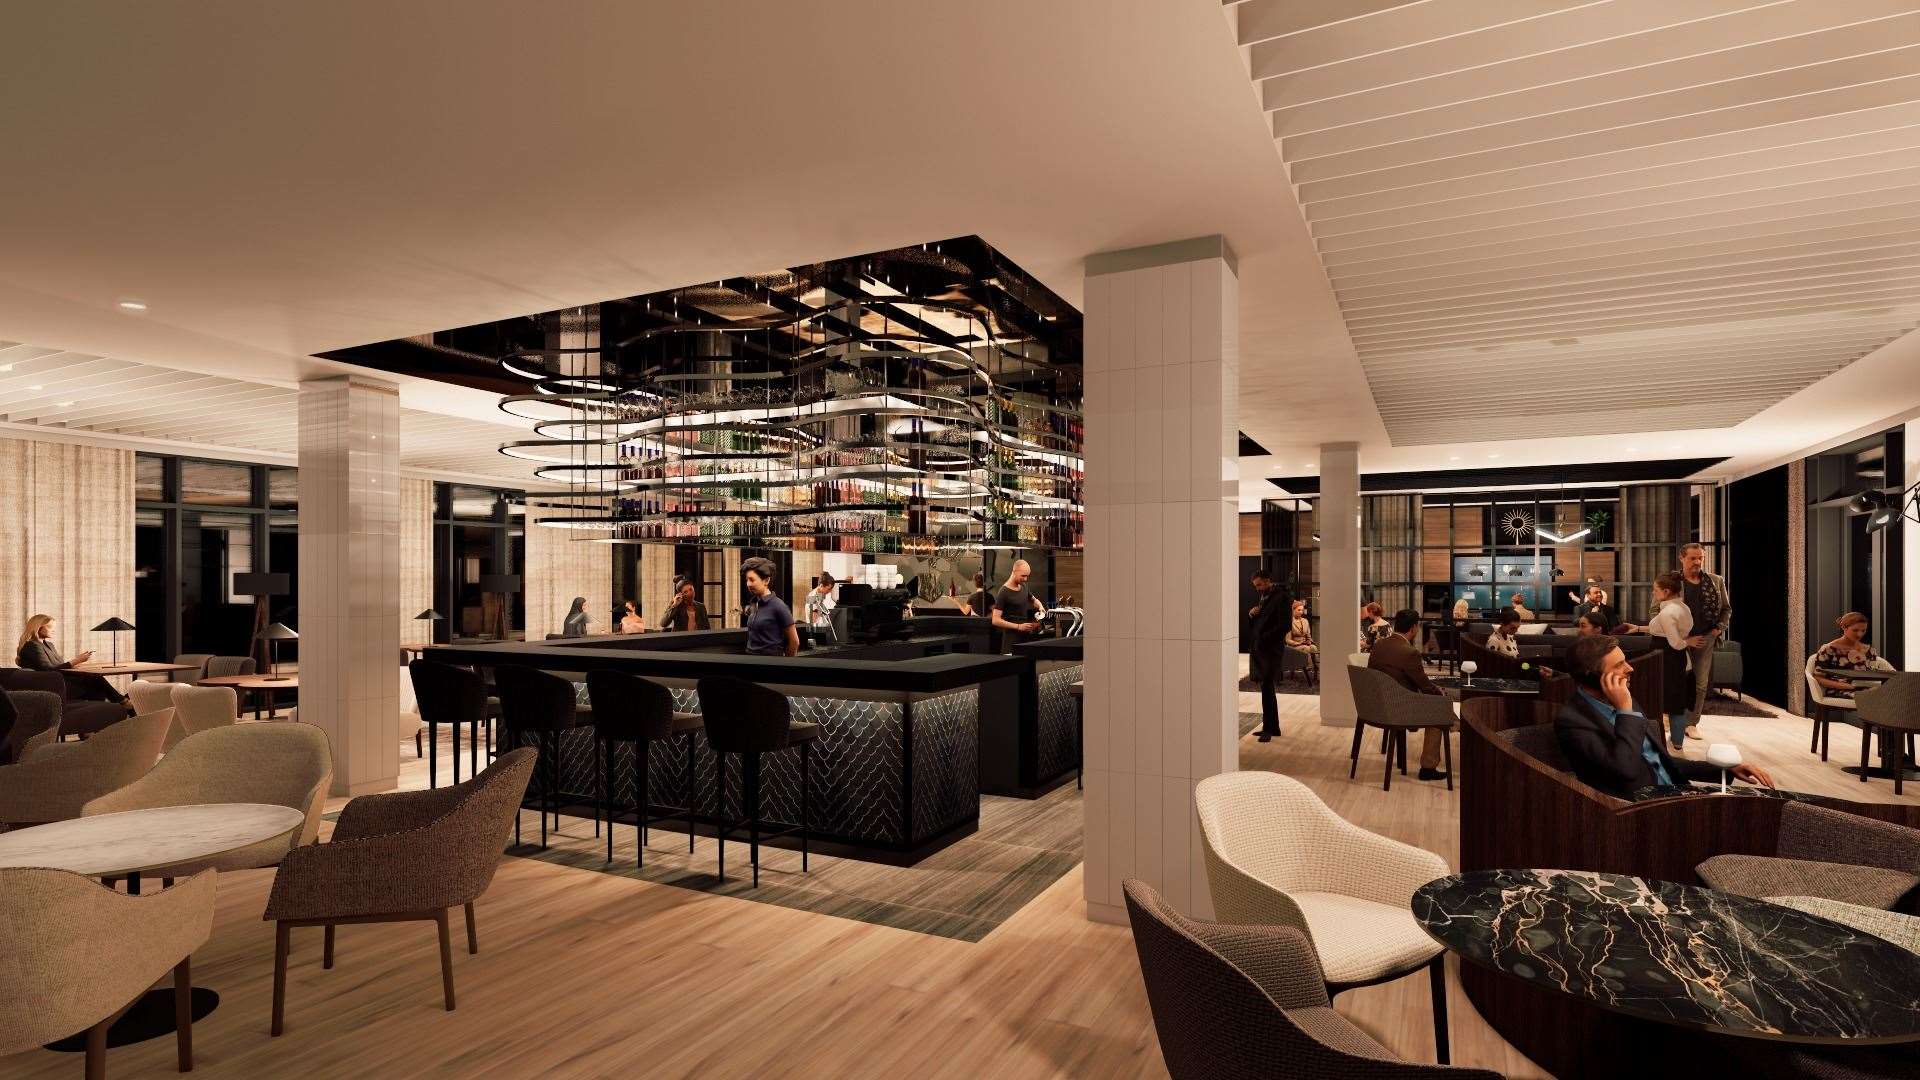 Designs for the bar at the new hotel. Design by: Apto Architects.